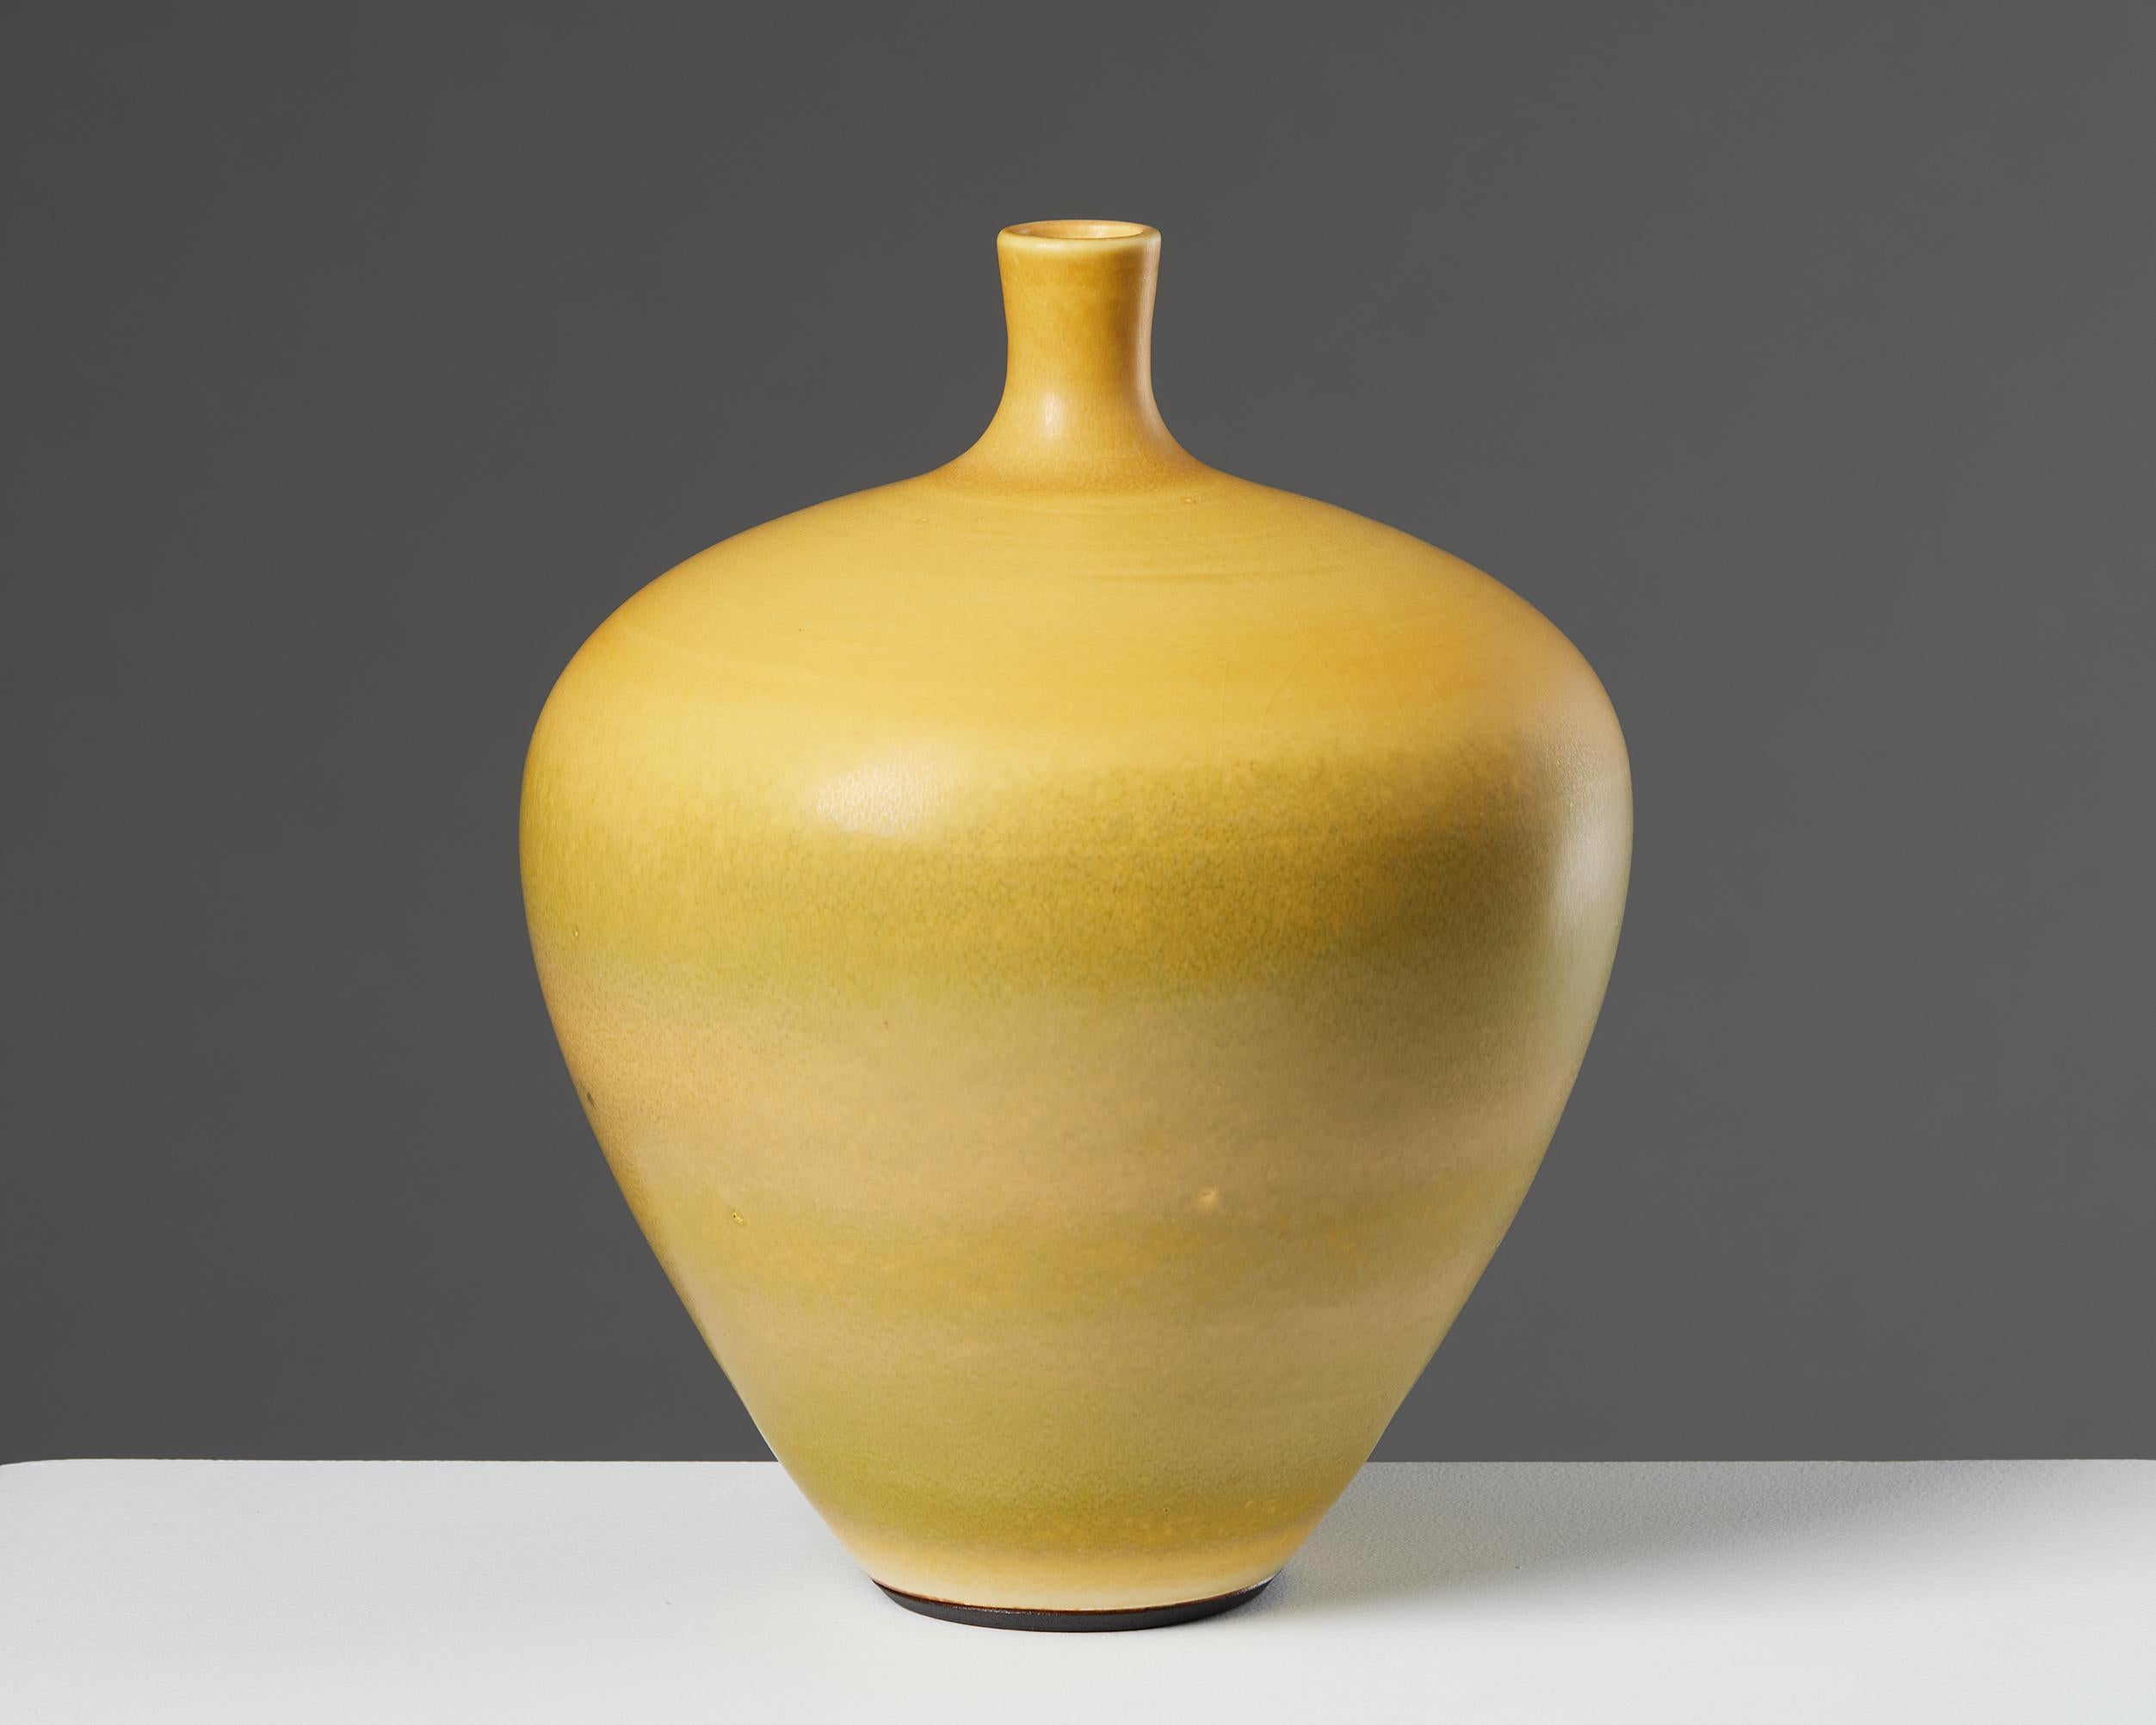 Vase by Berndt Friberg for Gustavsberg,
Sweden, 1977.

Stoneware.

Signed.

From a private Swedish collection.

Berndt Friberg is among the most skilled Swedish ceramicists of the 20th century. He produced tremendously sought-after pottery and